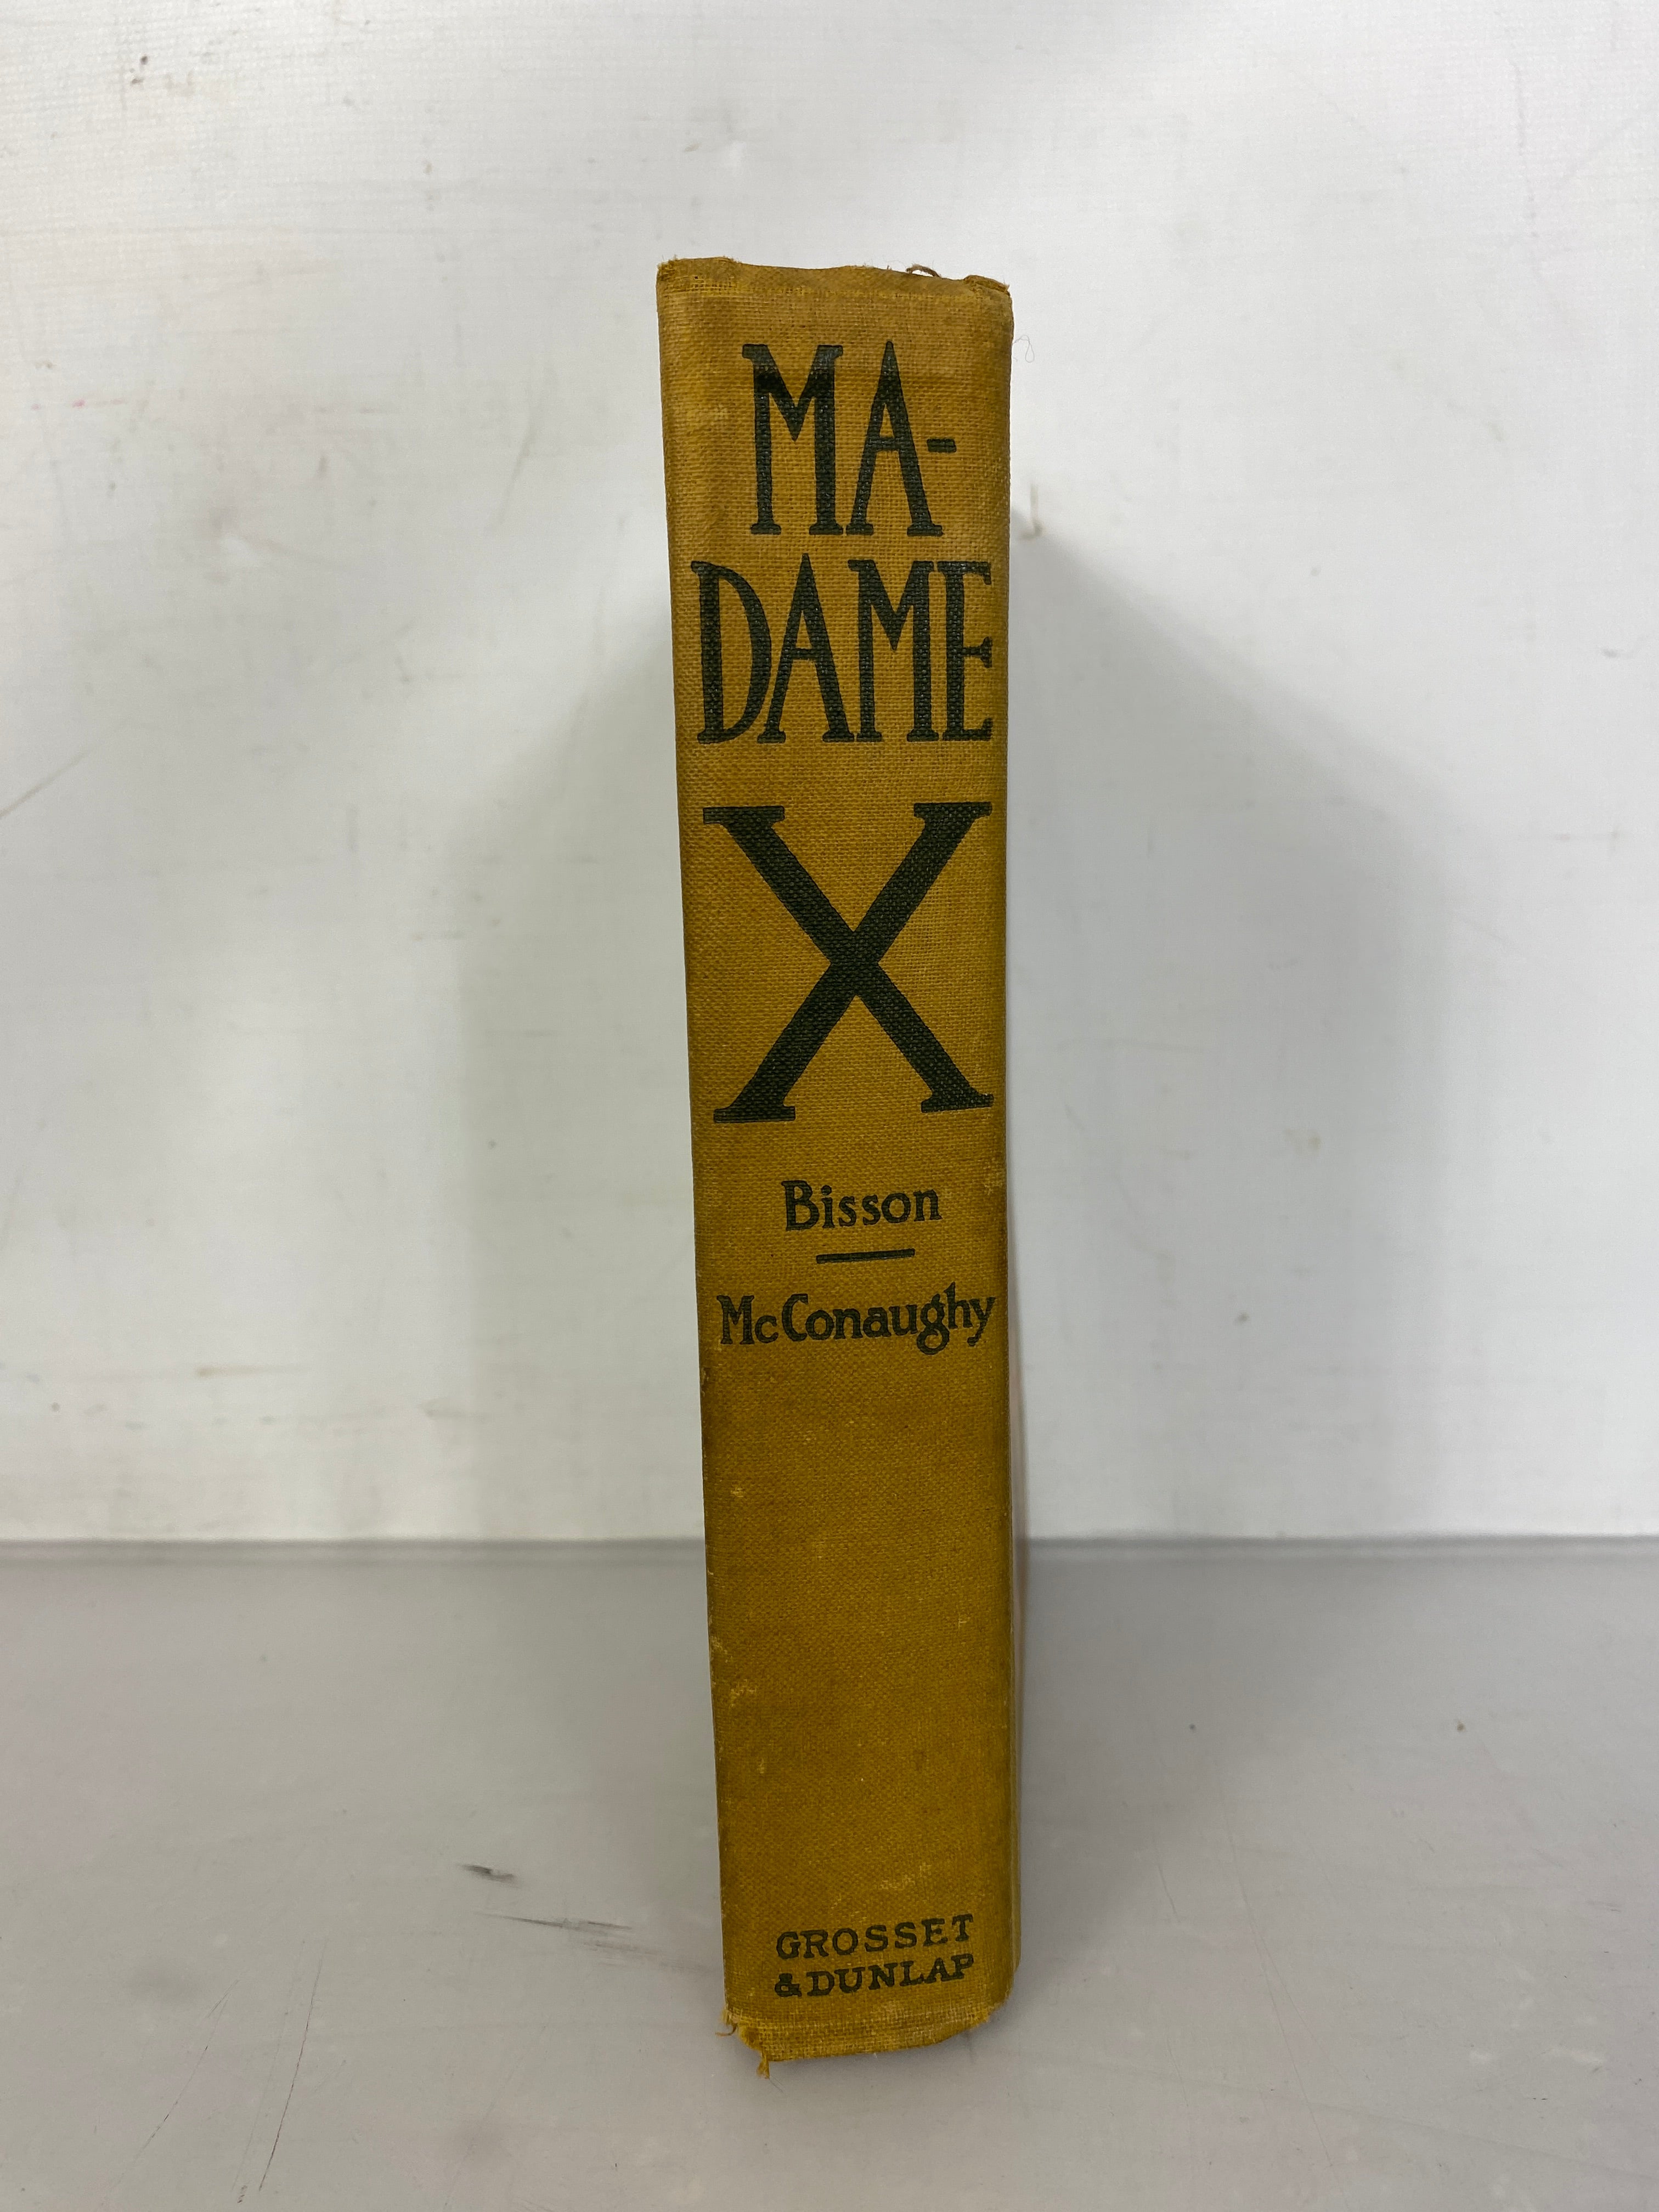 Lot of 2 Antique Mystery Novels: Madame X 1910 and The Man in Lower Ten 1909 HC